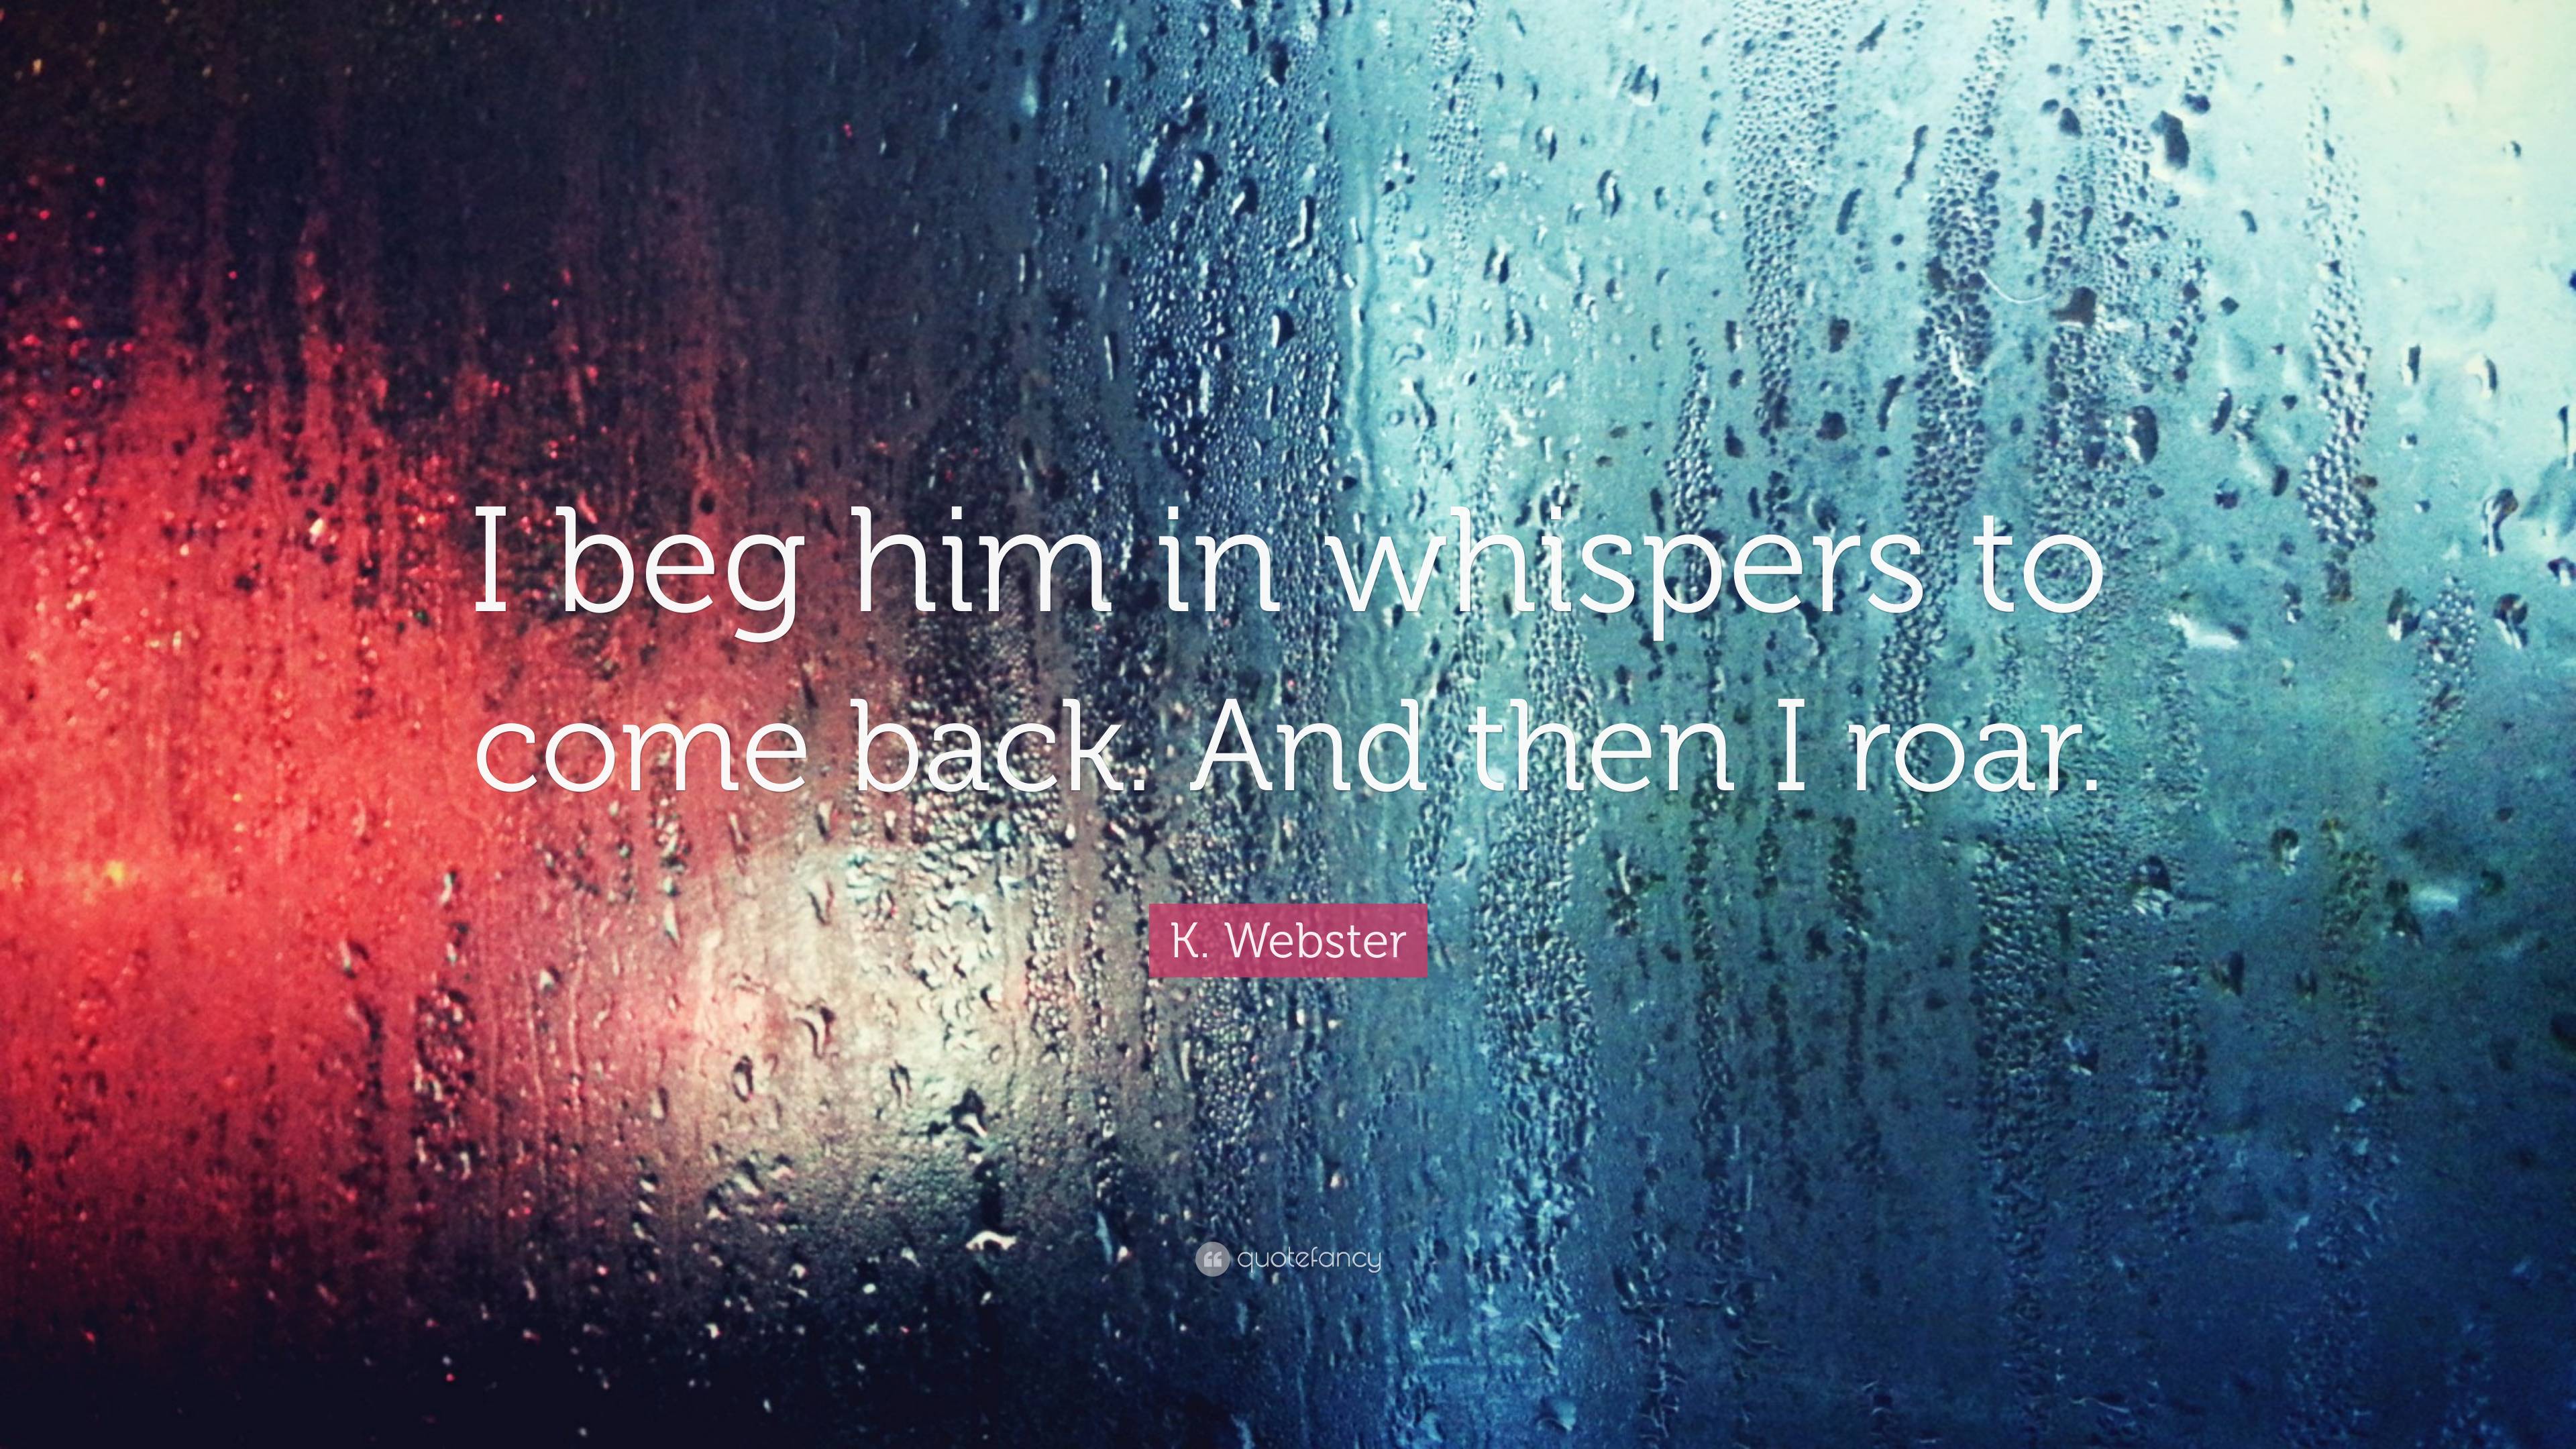 Whispers and the Roars by K. Webster